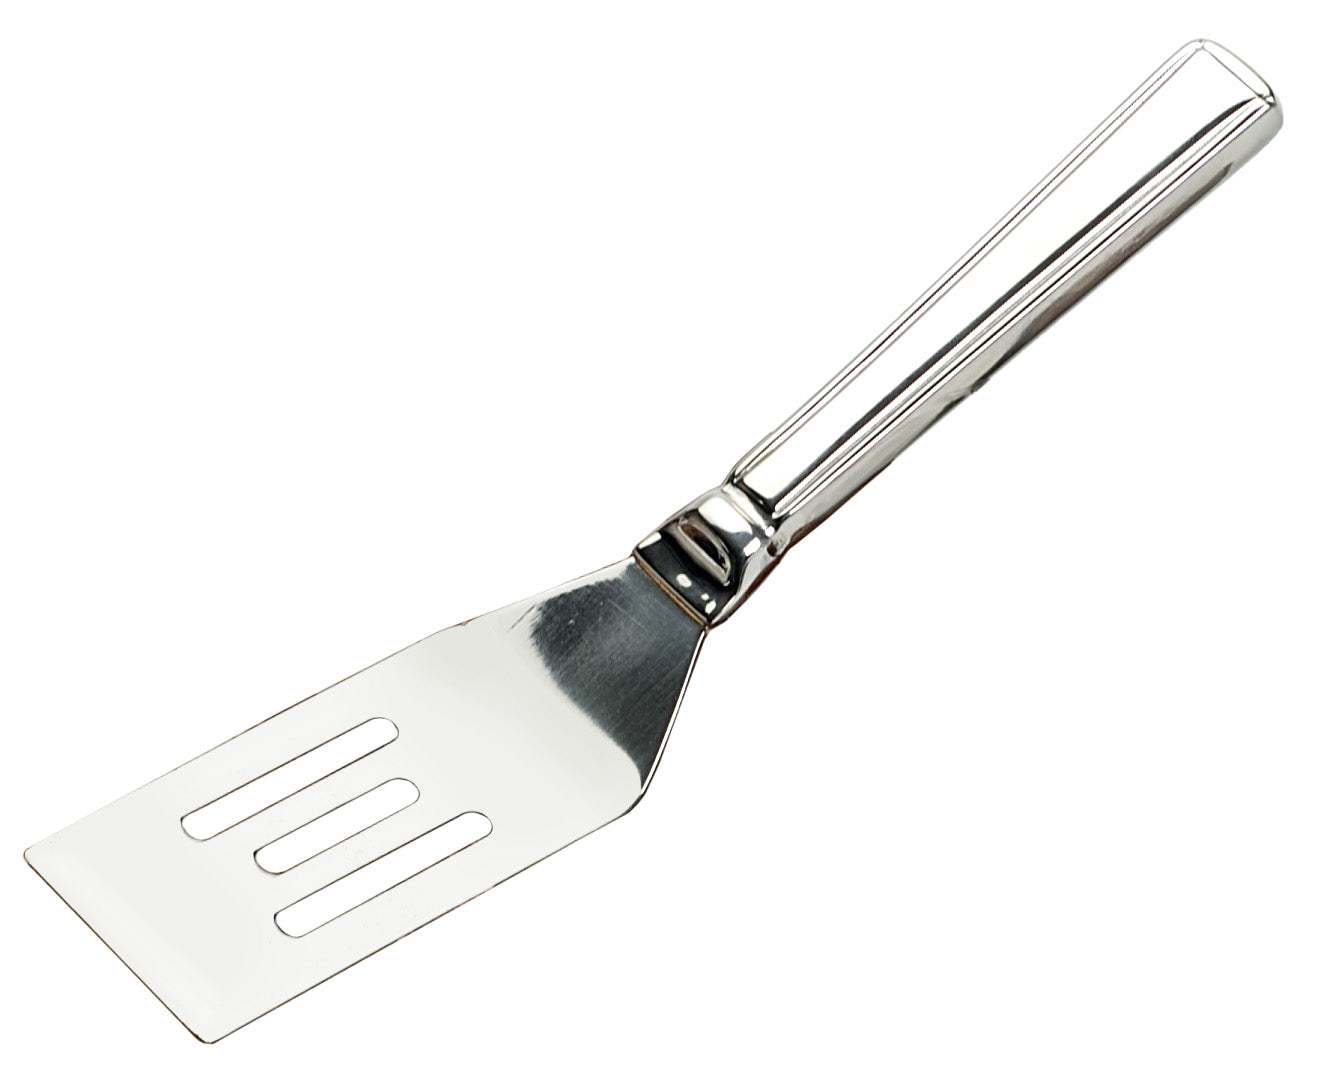 stainless steel spatula on white background.